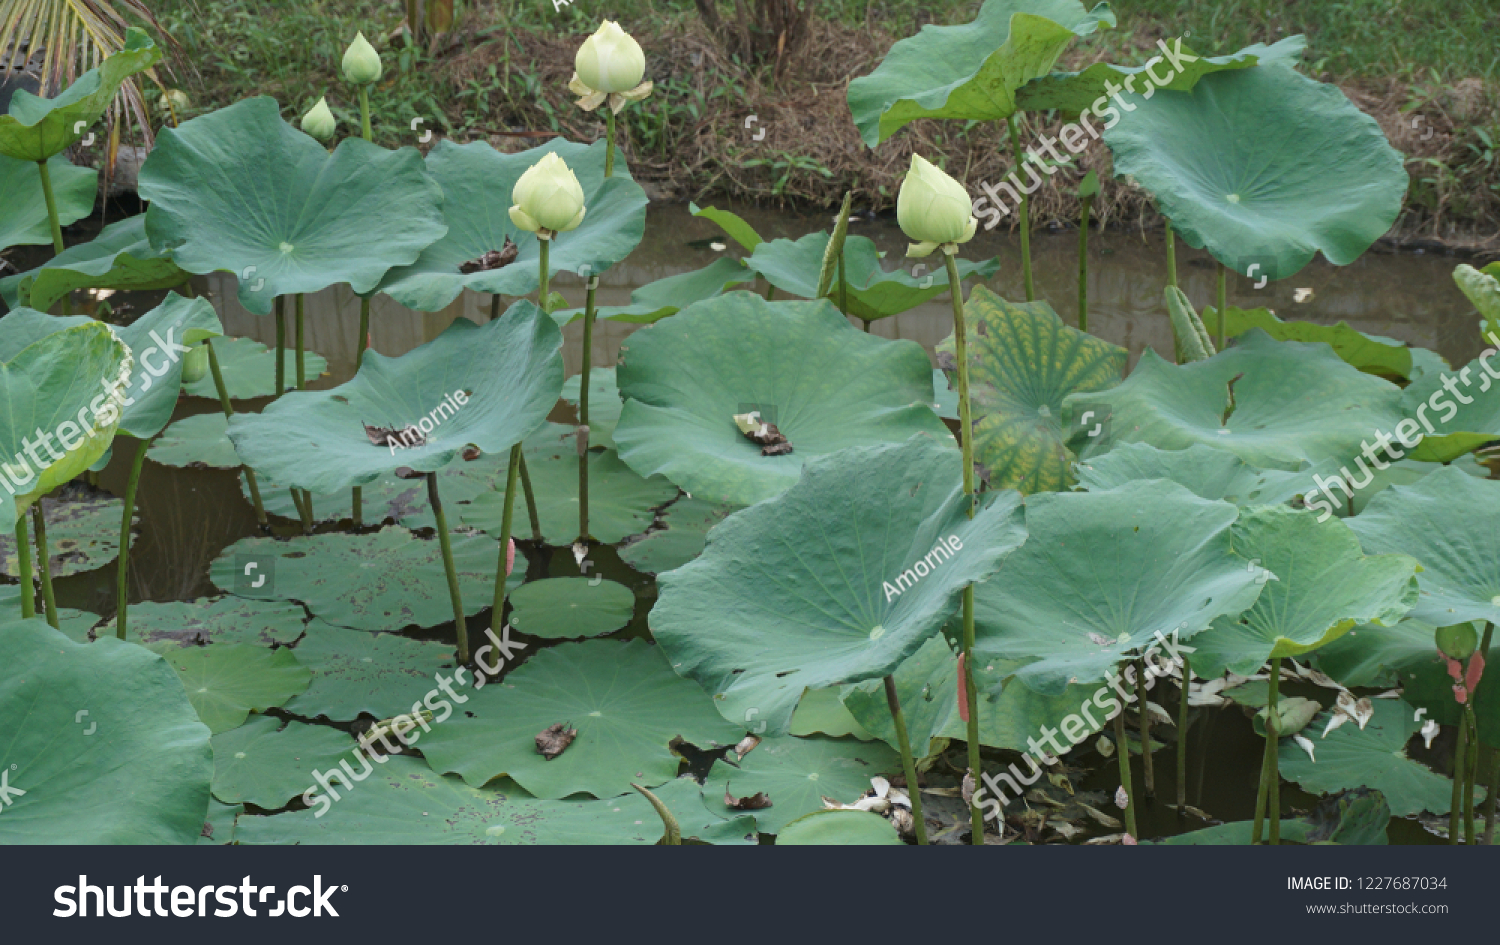 Lotus in a pond #1227687034